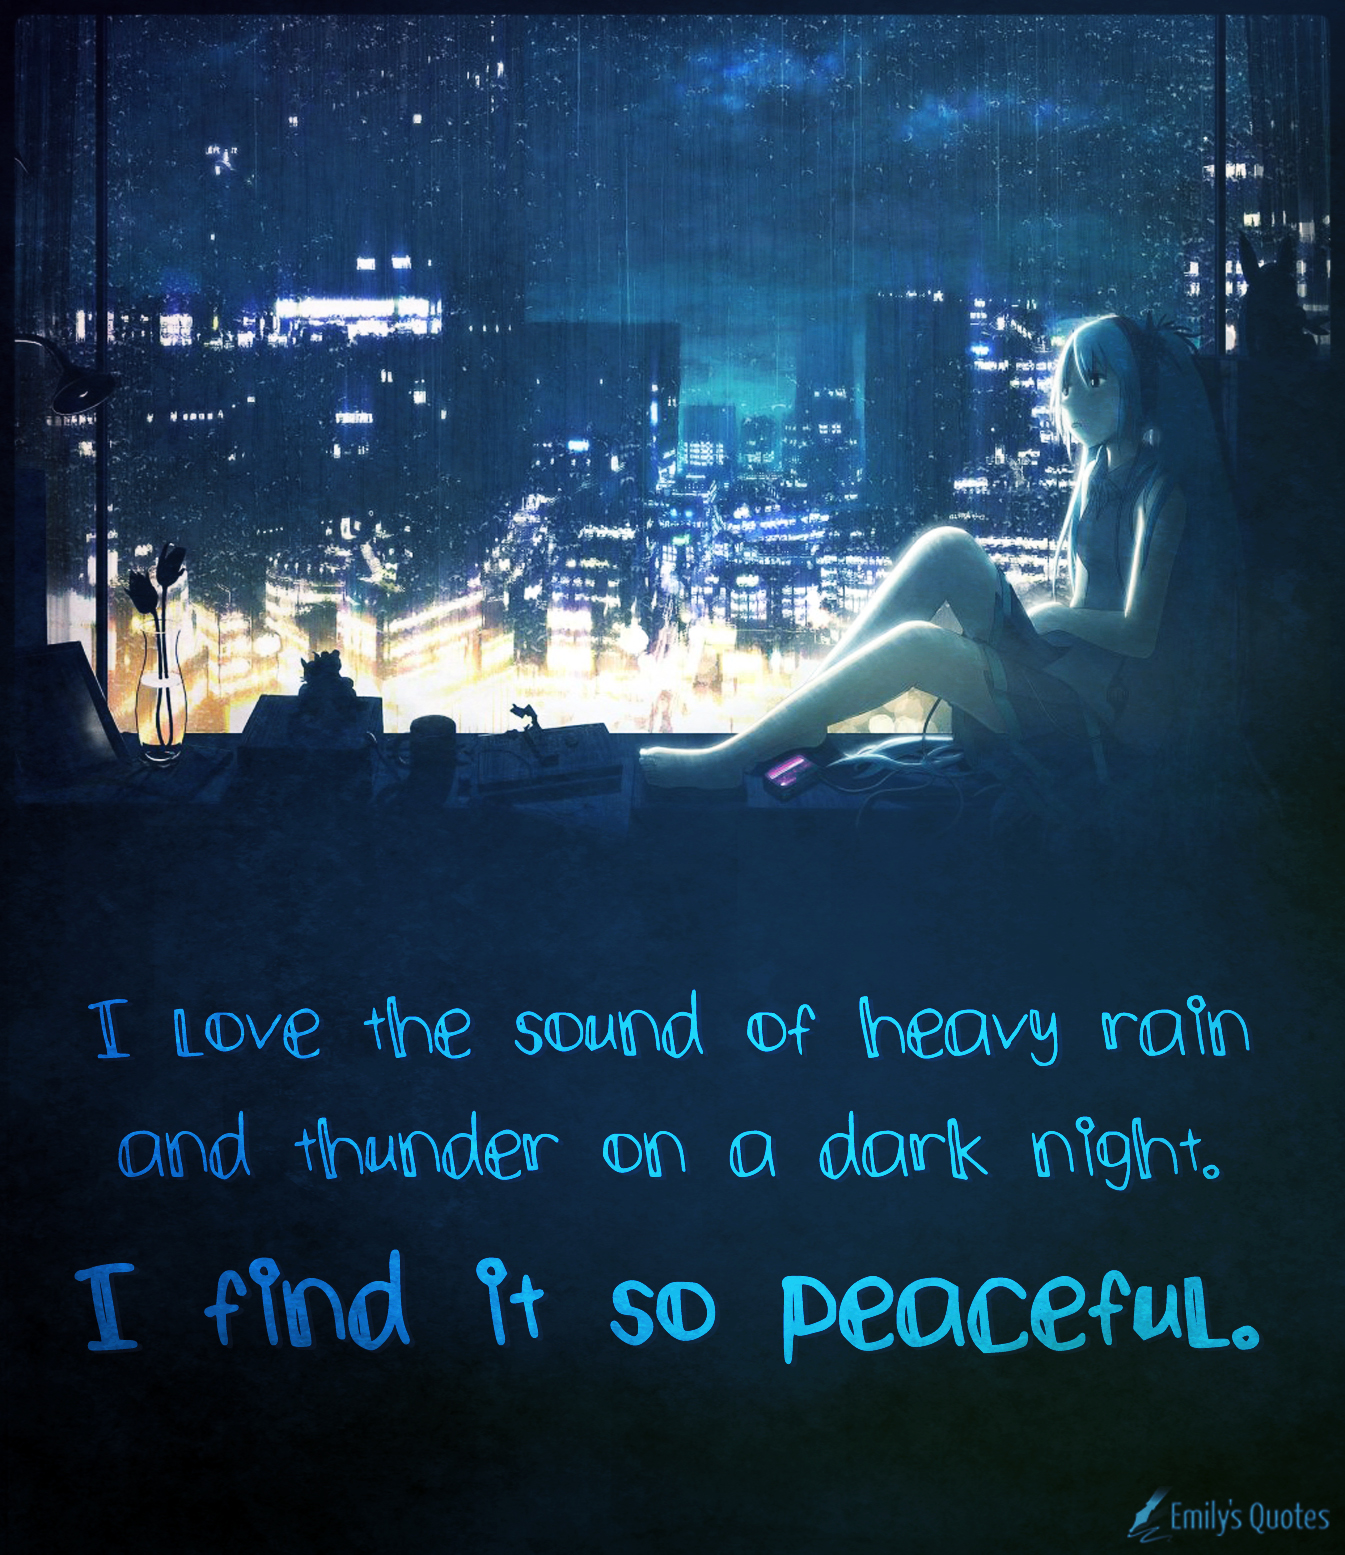 I love the sound of heavy rain and thunder on a dark night, I find it so peaceful